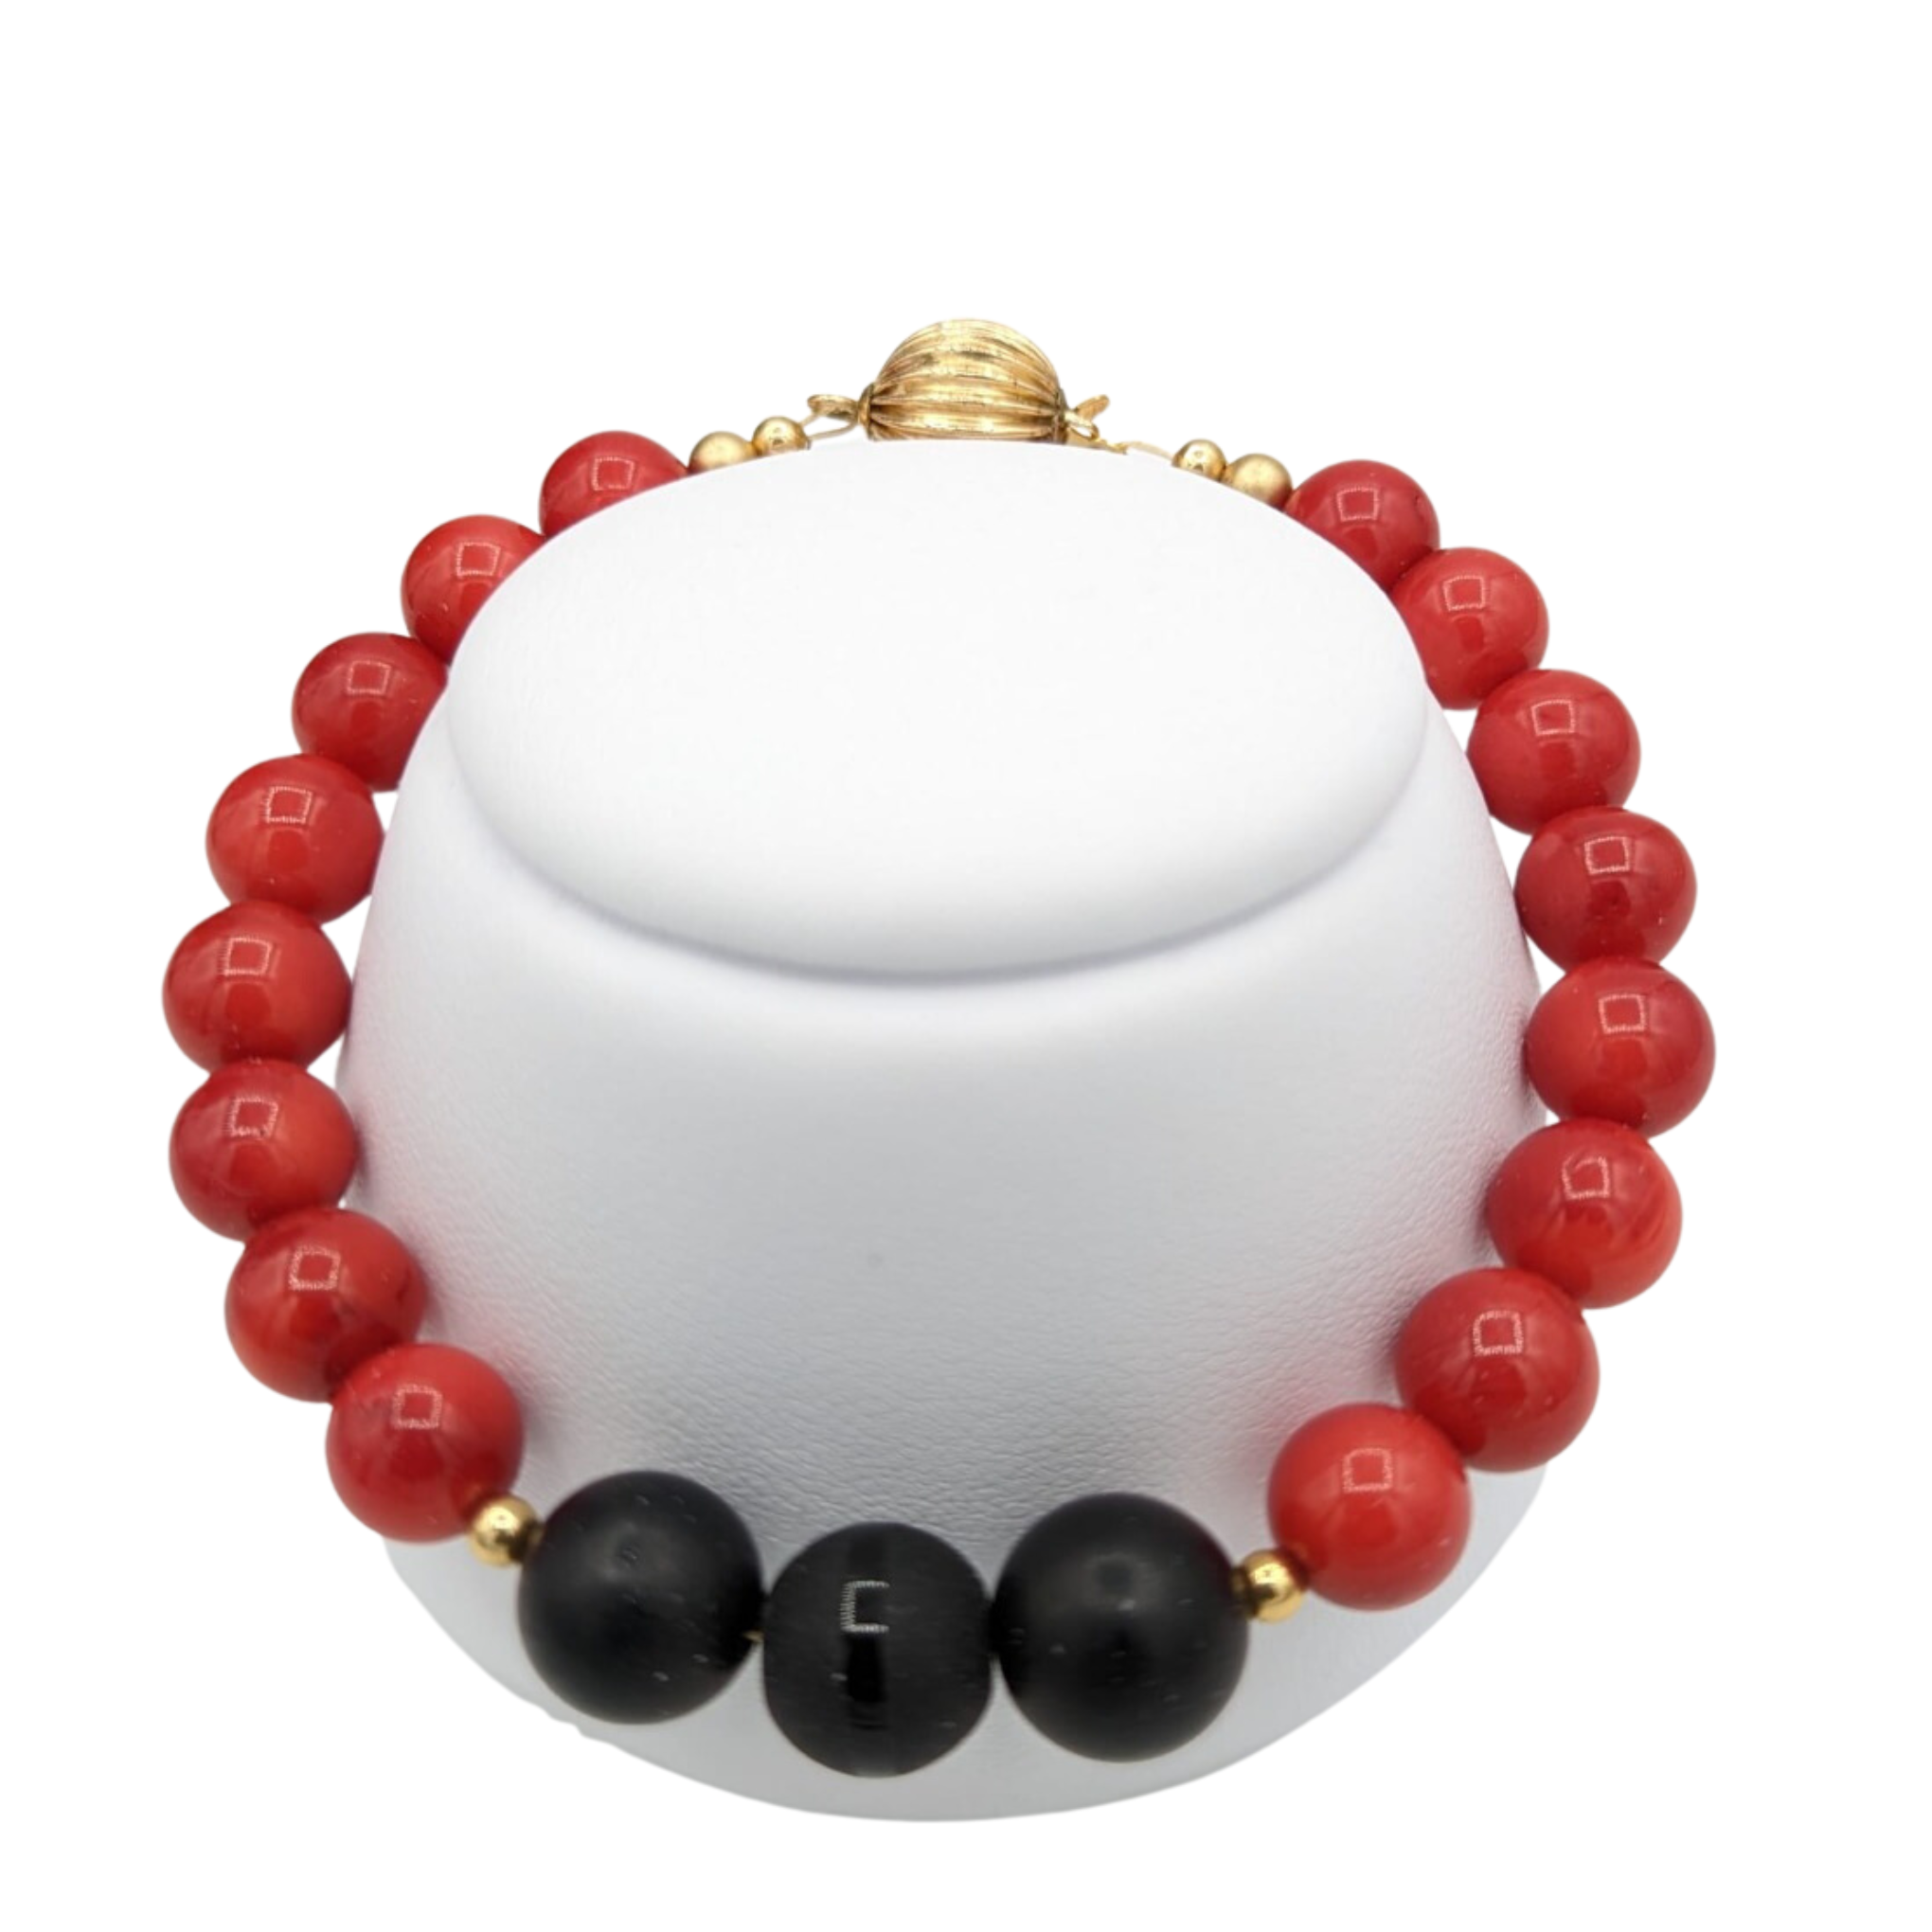 14K Gold-filled Handcrafted Red Coral and Black Onyx Bracelet